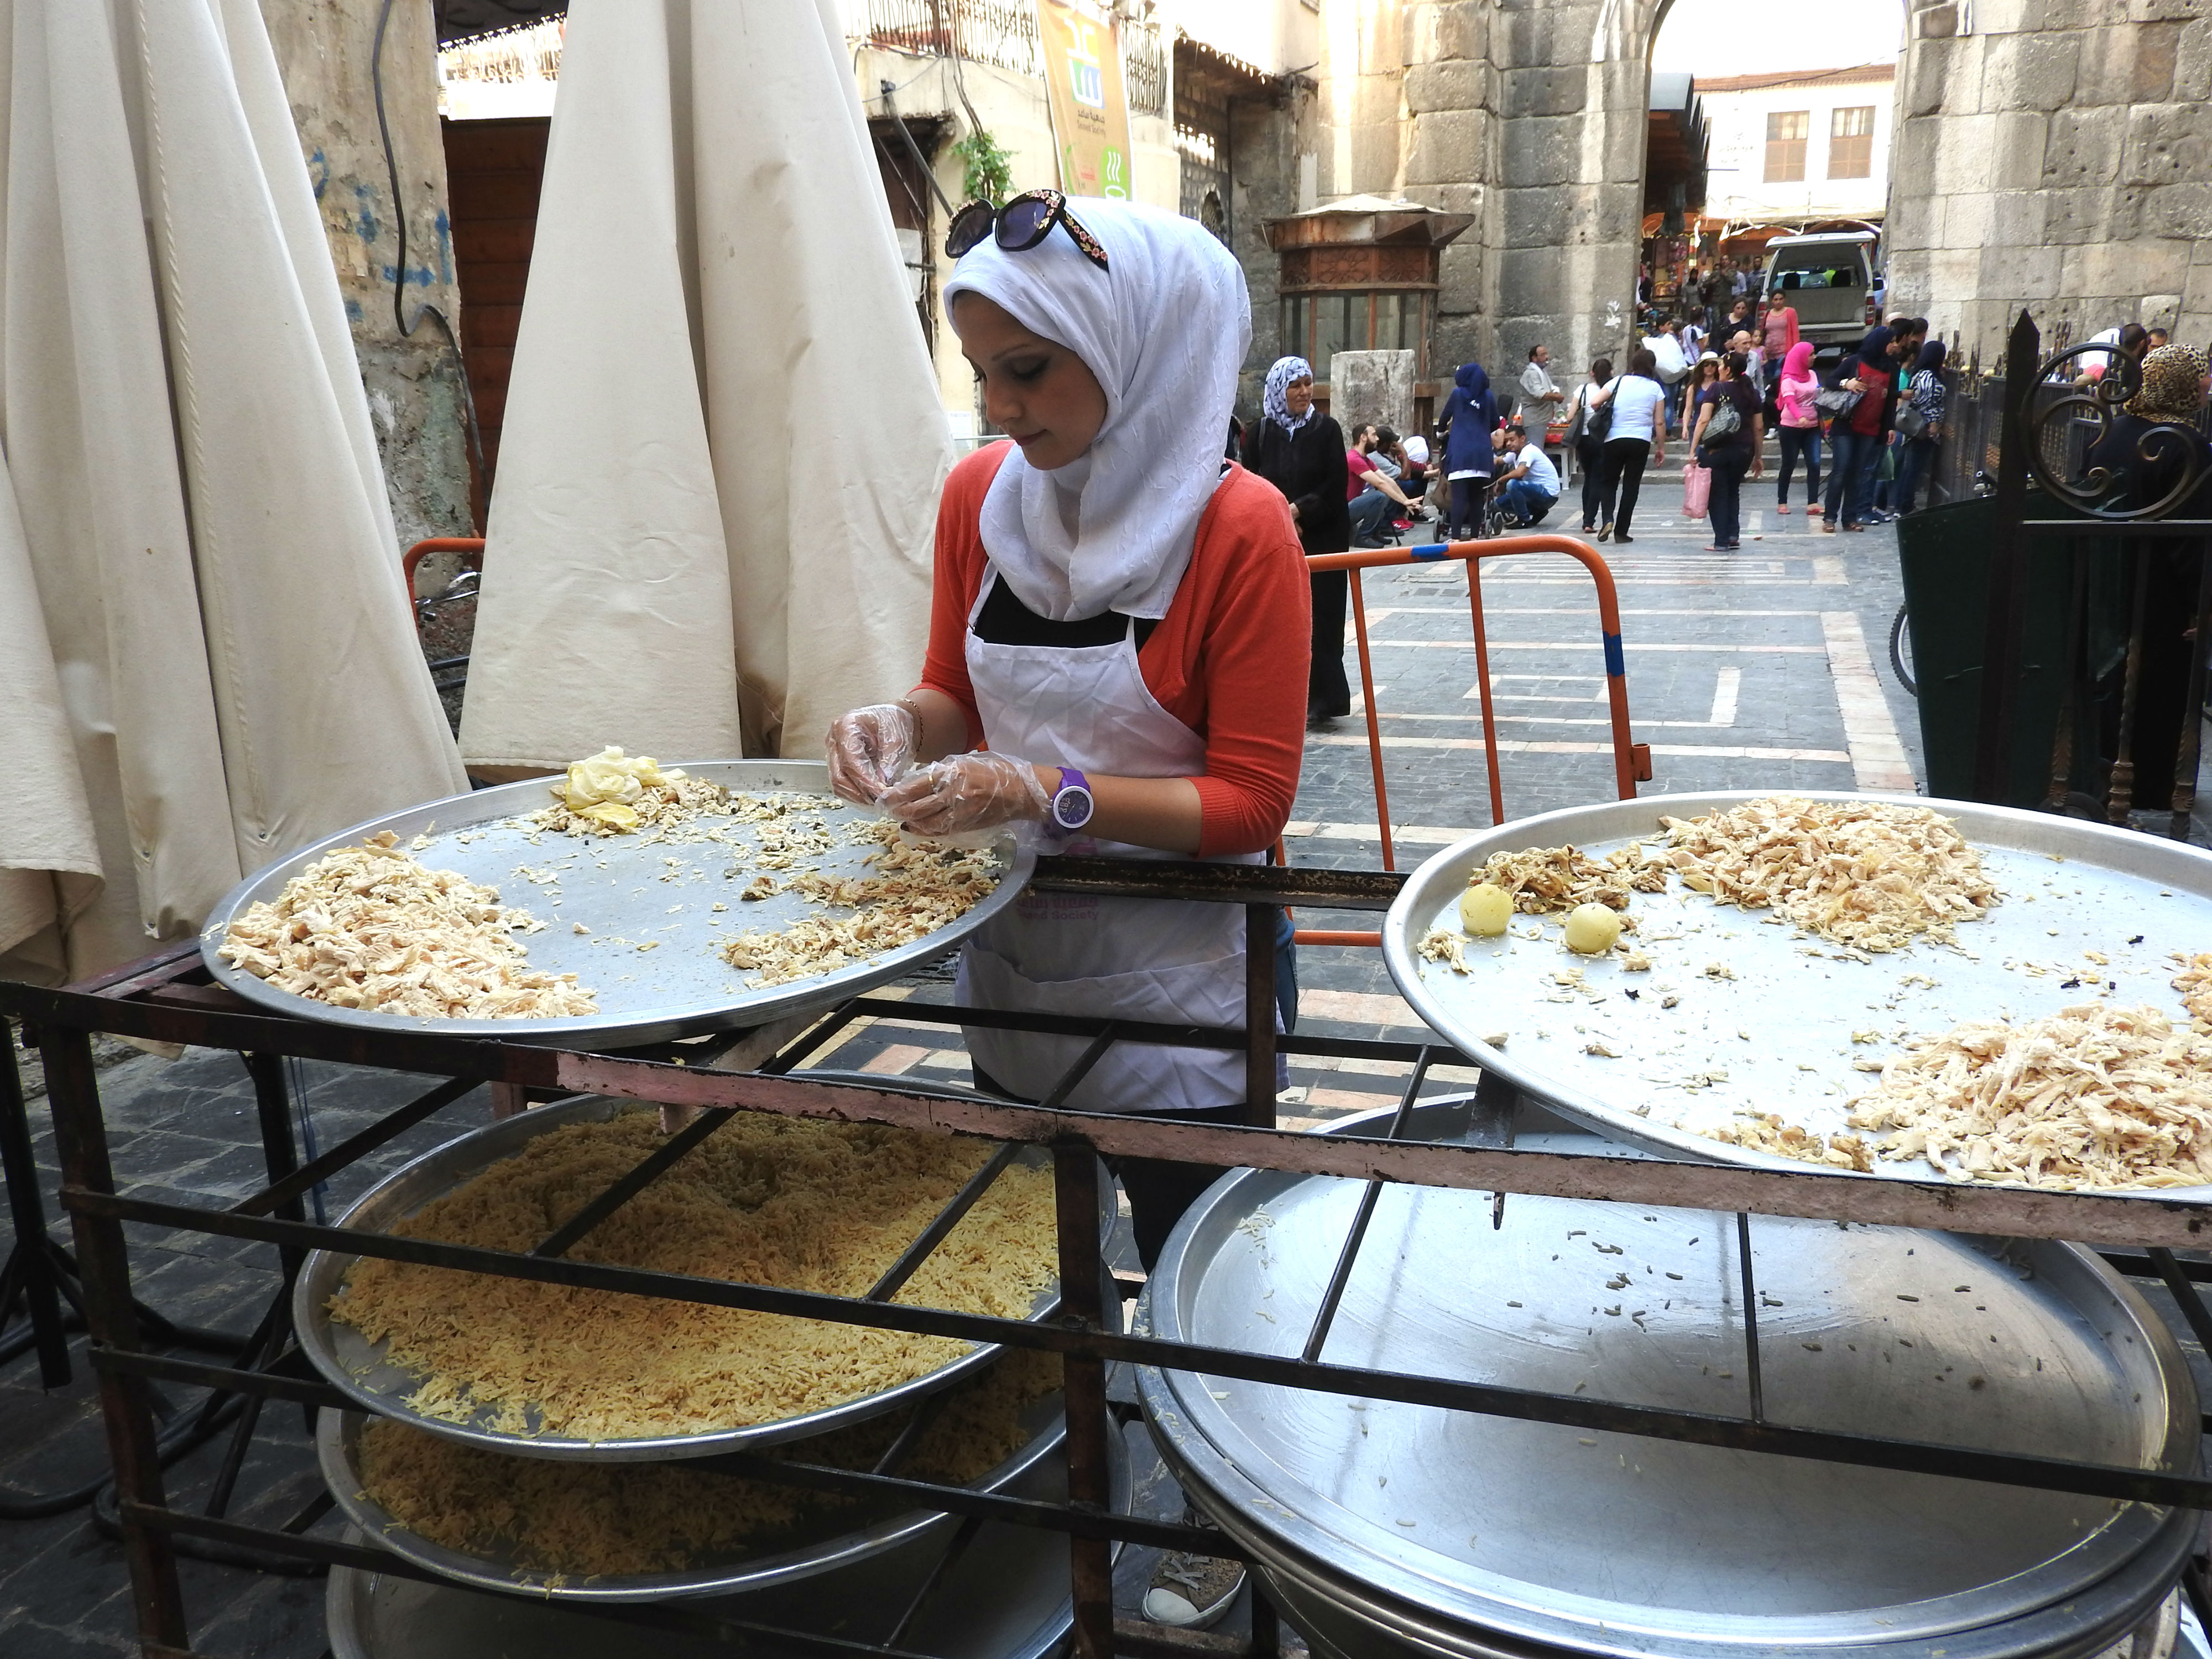  Behind the Umayyad Mosque in Old Damascus, one of tens of volunteers daily helps prepare the Iftar (fast-breaking) meals that the Saaed Association was serving to impoverished Damascus residents, even delivering to those unable to pick up meals themselves. Starting with 3,000 recipients, by the end of Ramadan, the volunteers were providing 10,000 meals daily in Damascus alone, with another combined 7,000 meals prepared in Hama and Homs.